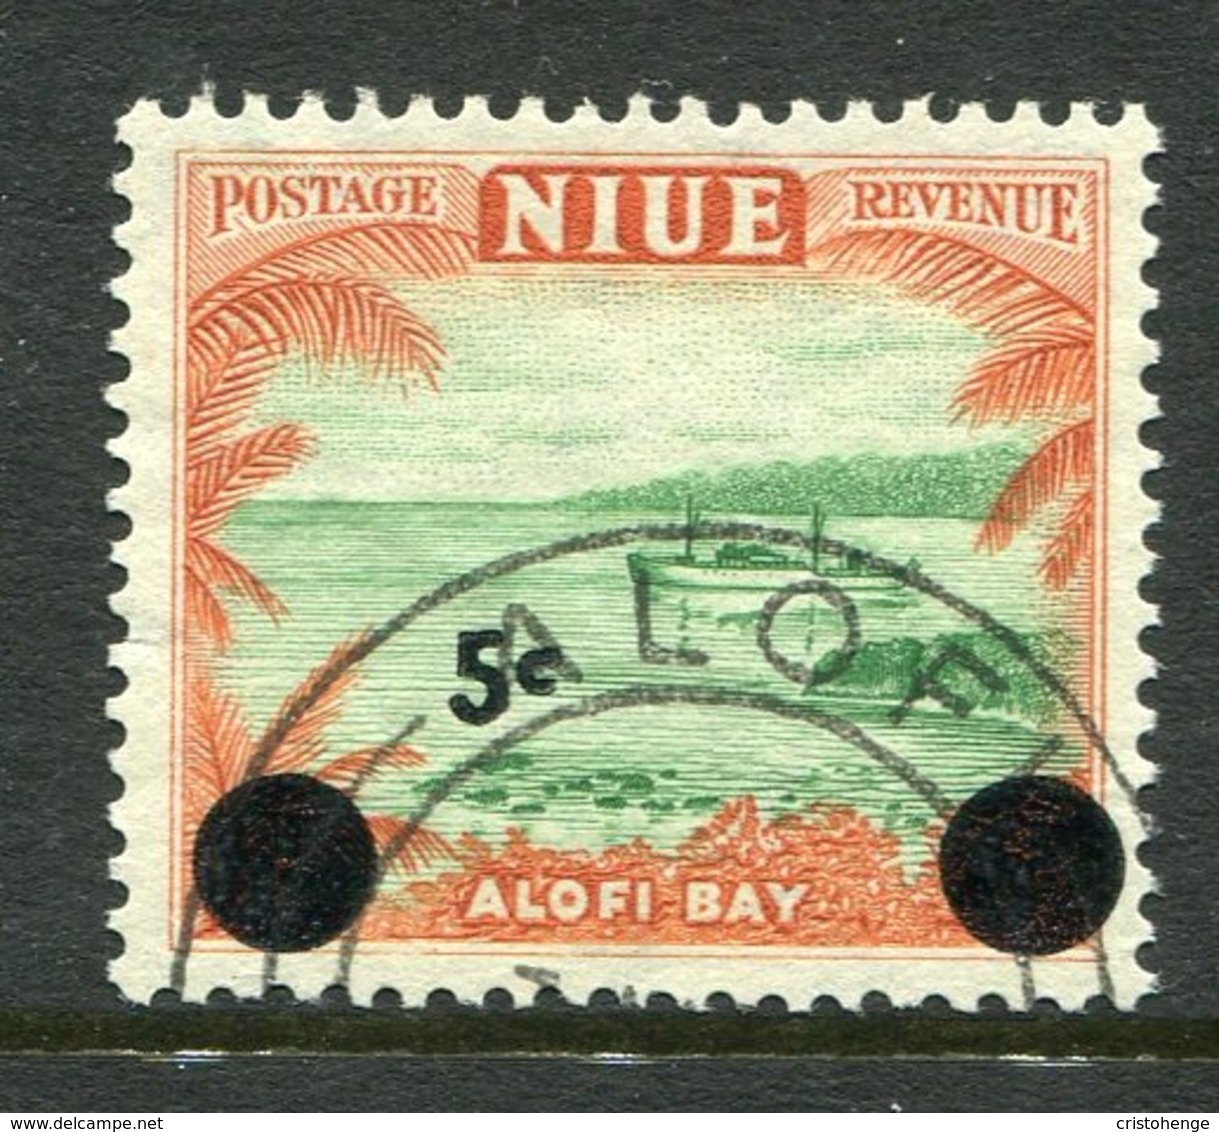 Niue 1967 Pictorials - Decimal Currency Surcharges - 5c On 6d Alofi Bay Used (SG 130) - Niue